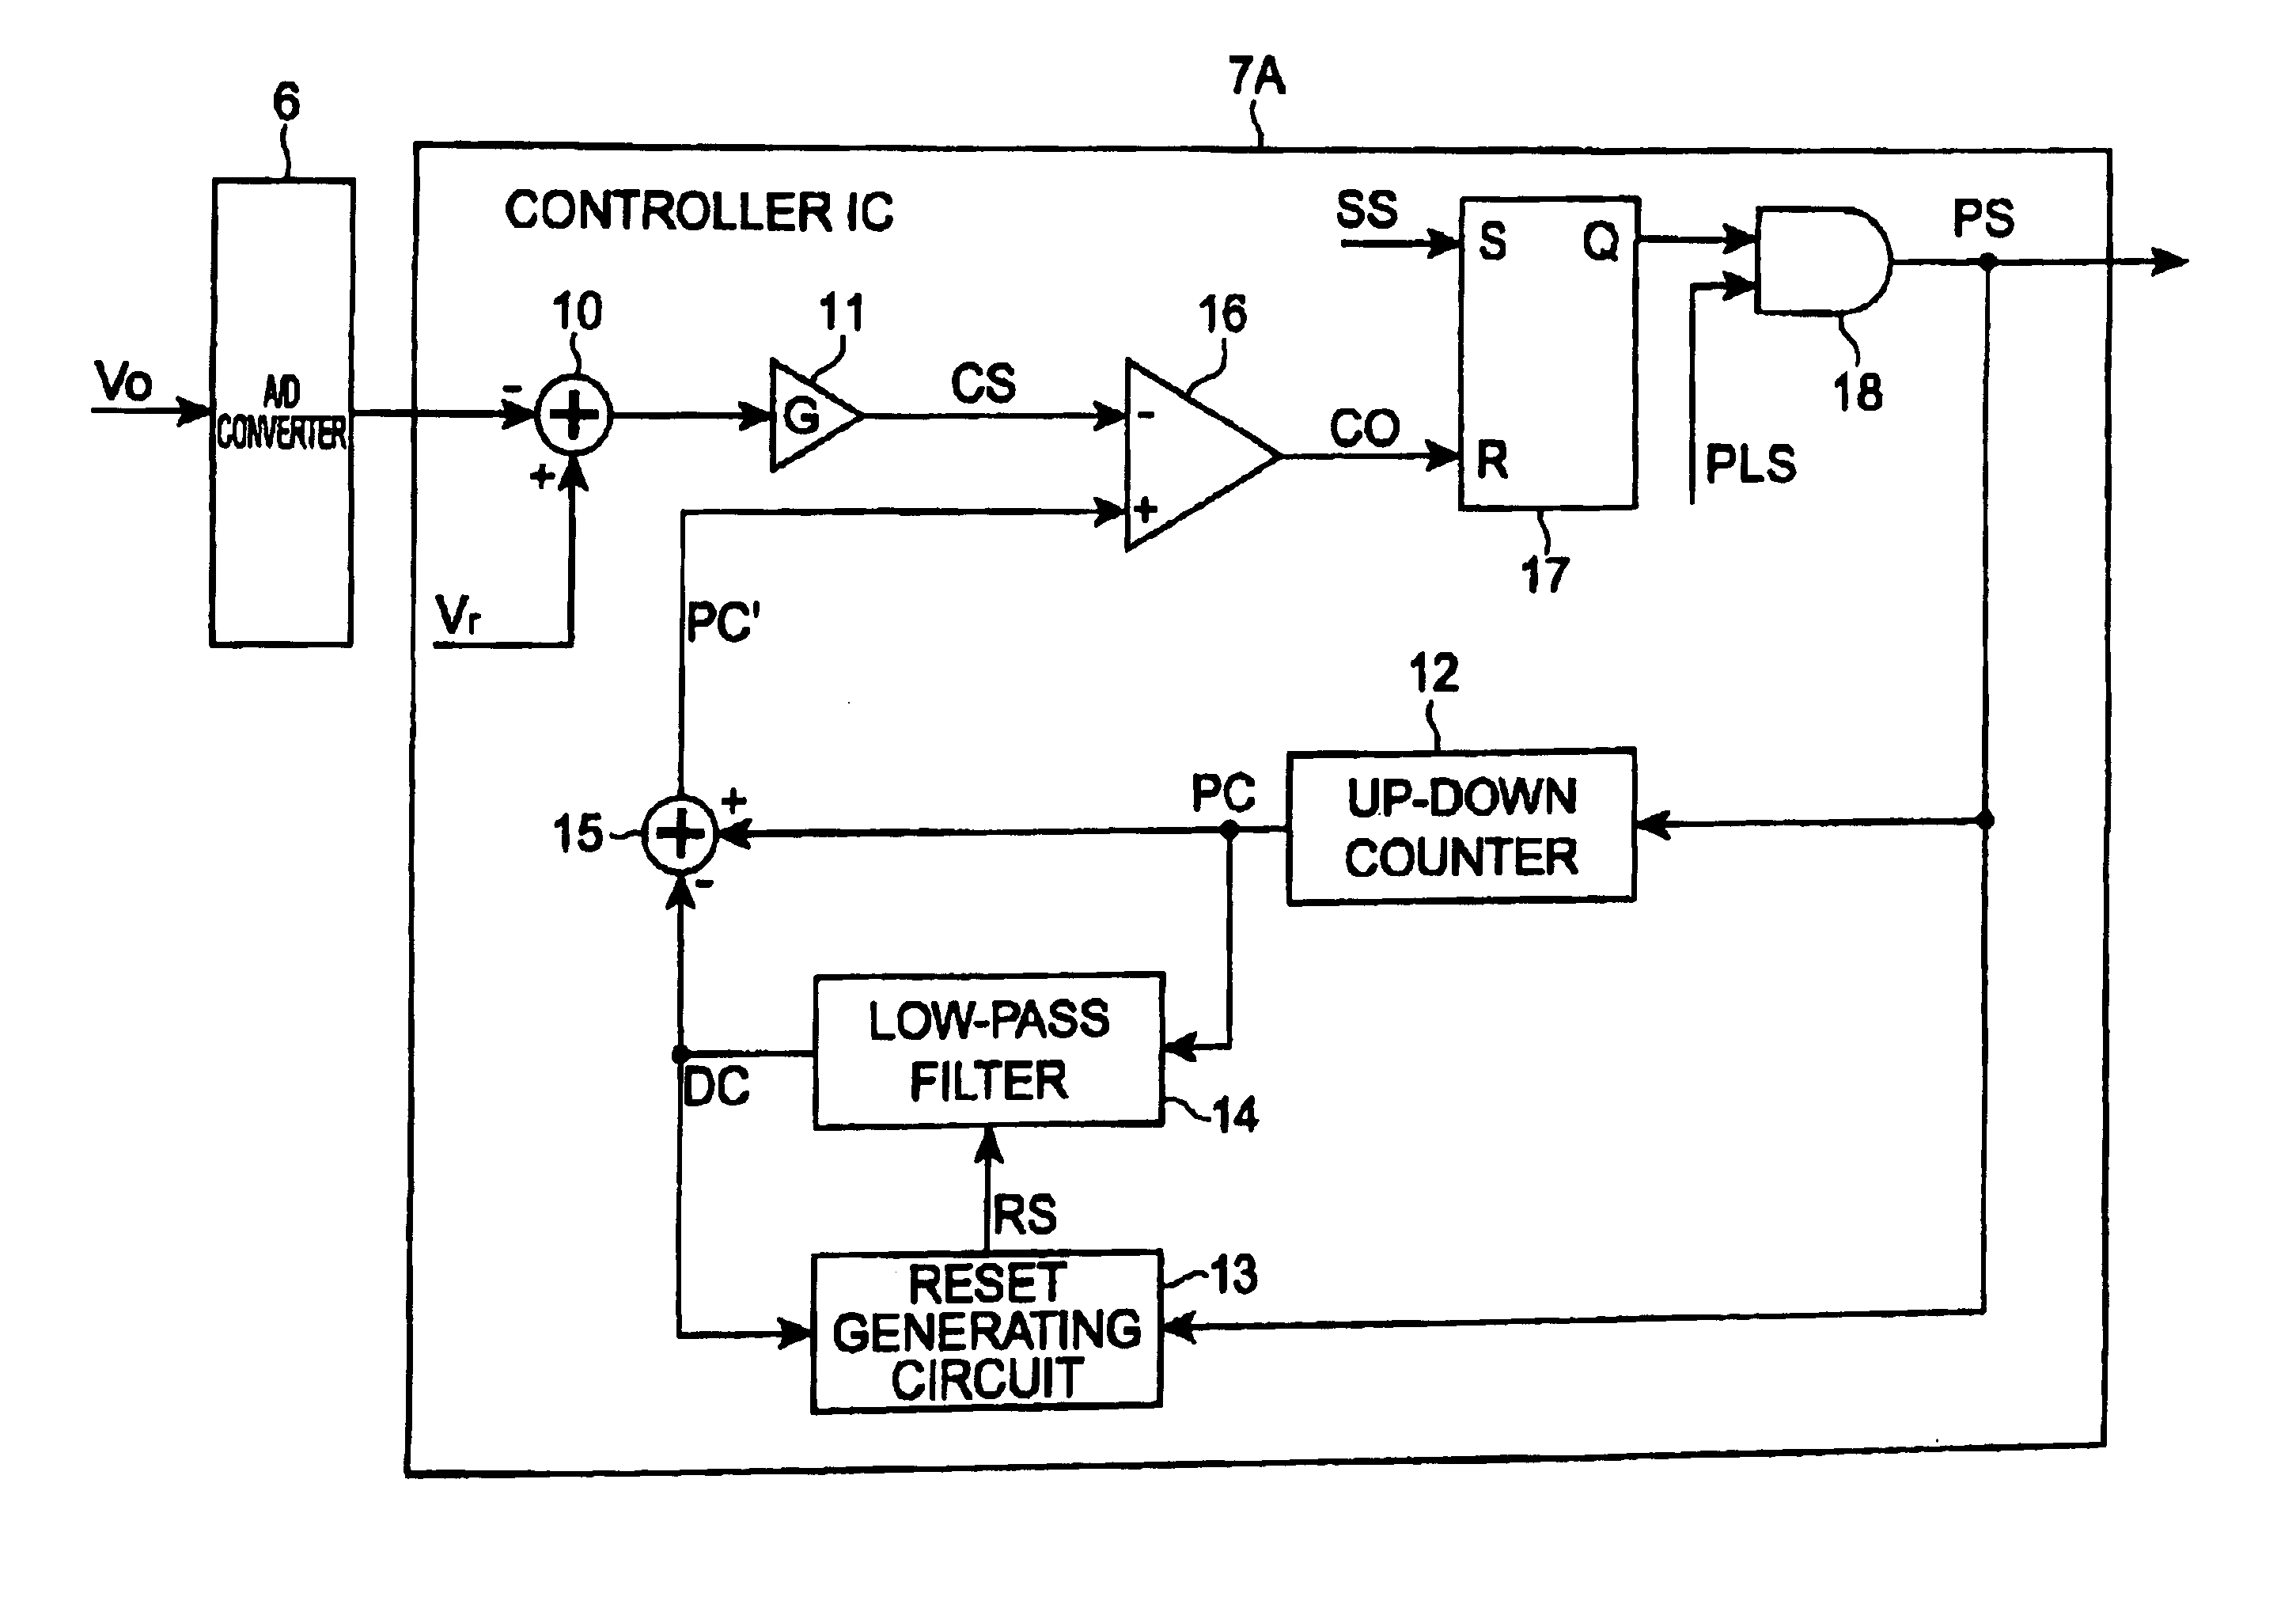 Switching power supply controller and switching power supply